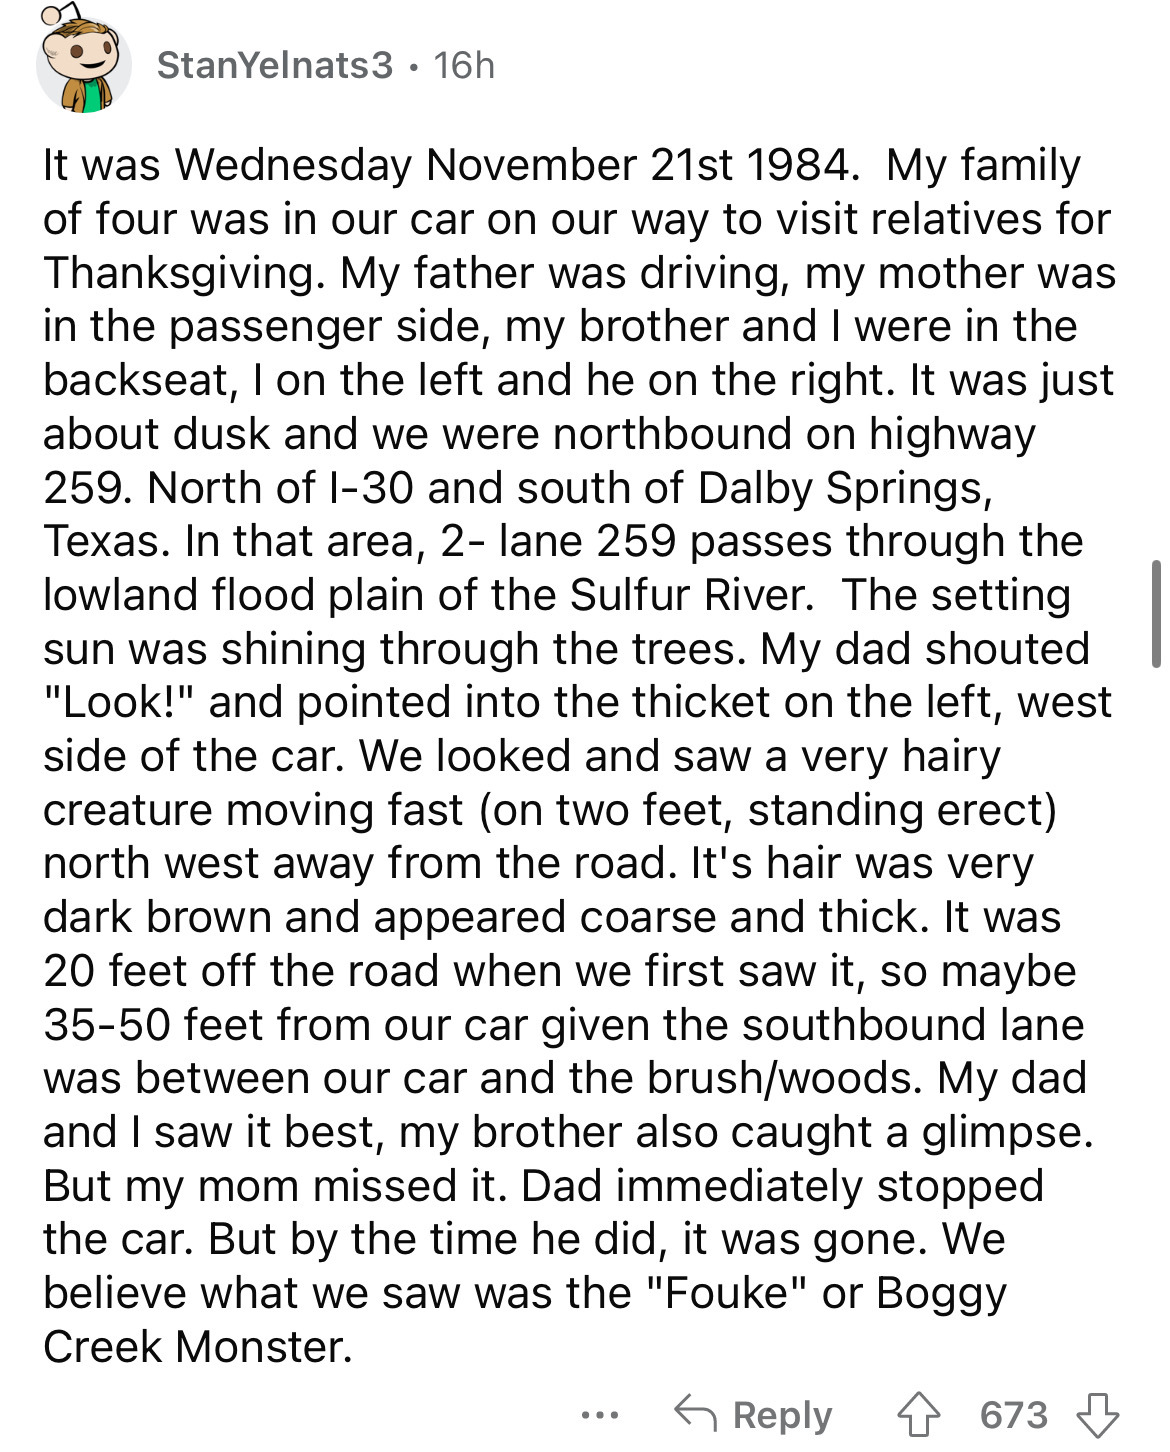 document - StanYelnats3 It was Wednesday November 21st 1984. My family of four was in our car on our way to visit relatives for Thanksgiving. My father was driving, my mother was in the passenger side, my brother and I were in the backseat, I on the left 